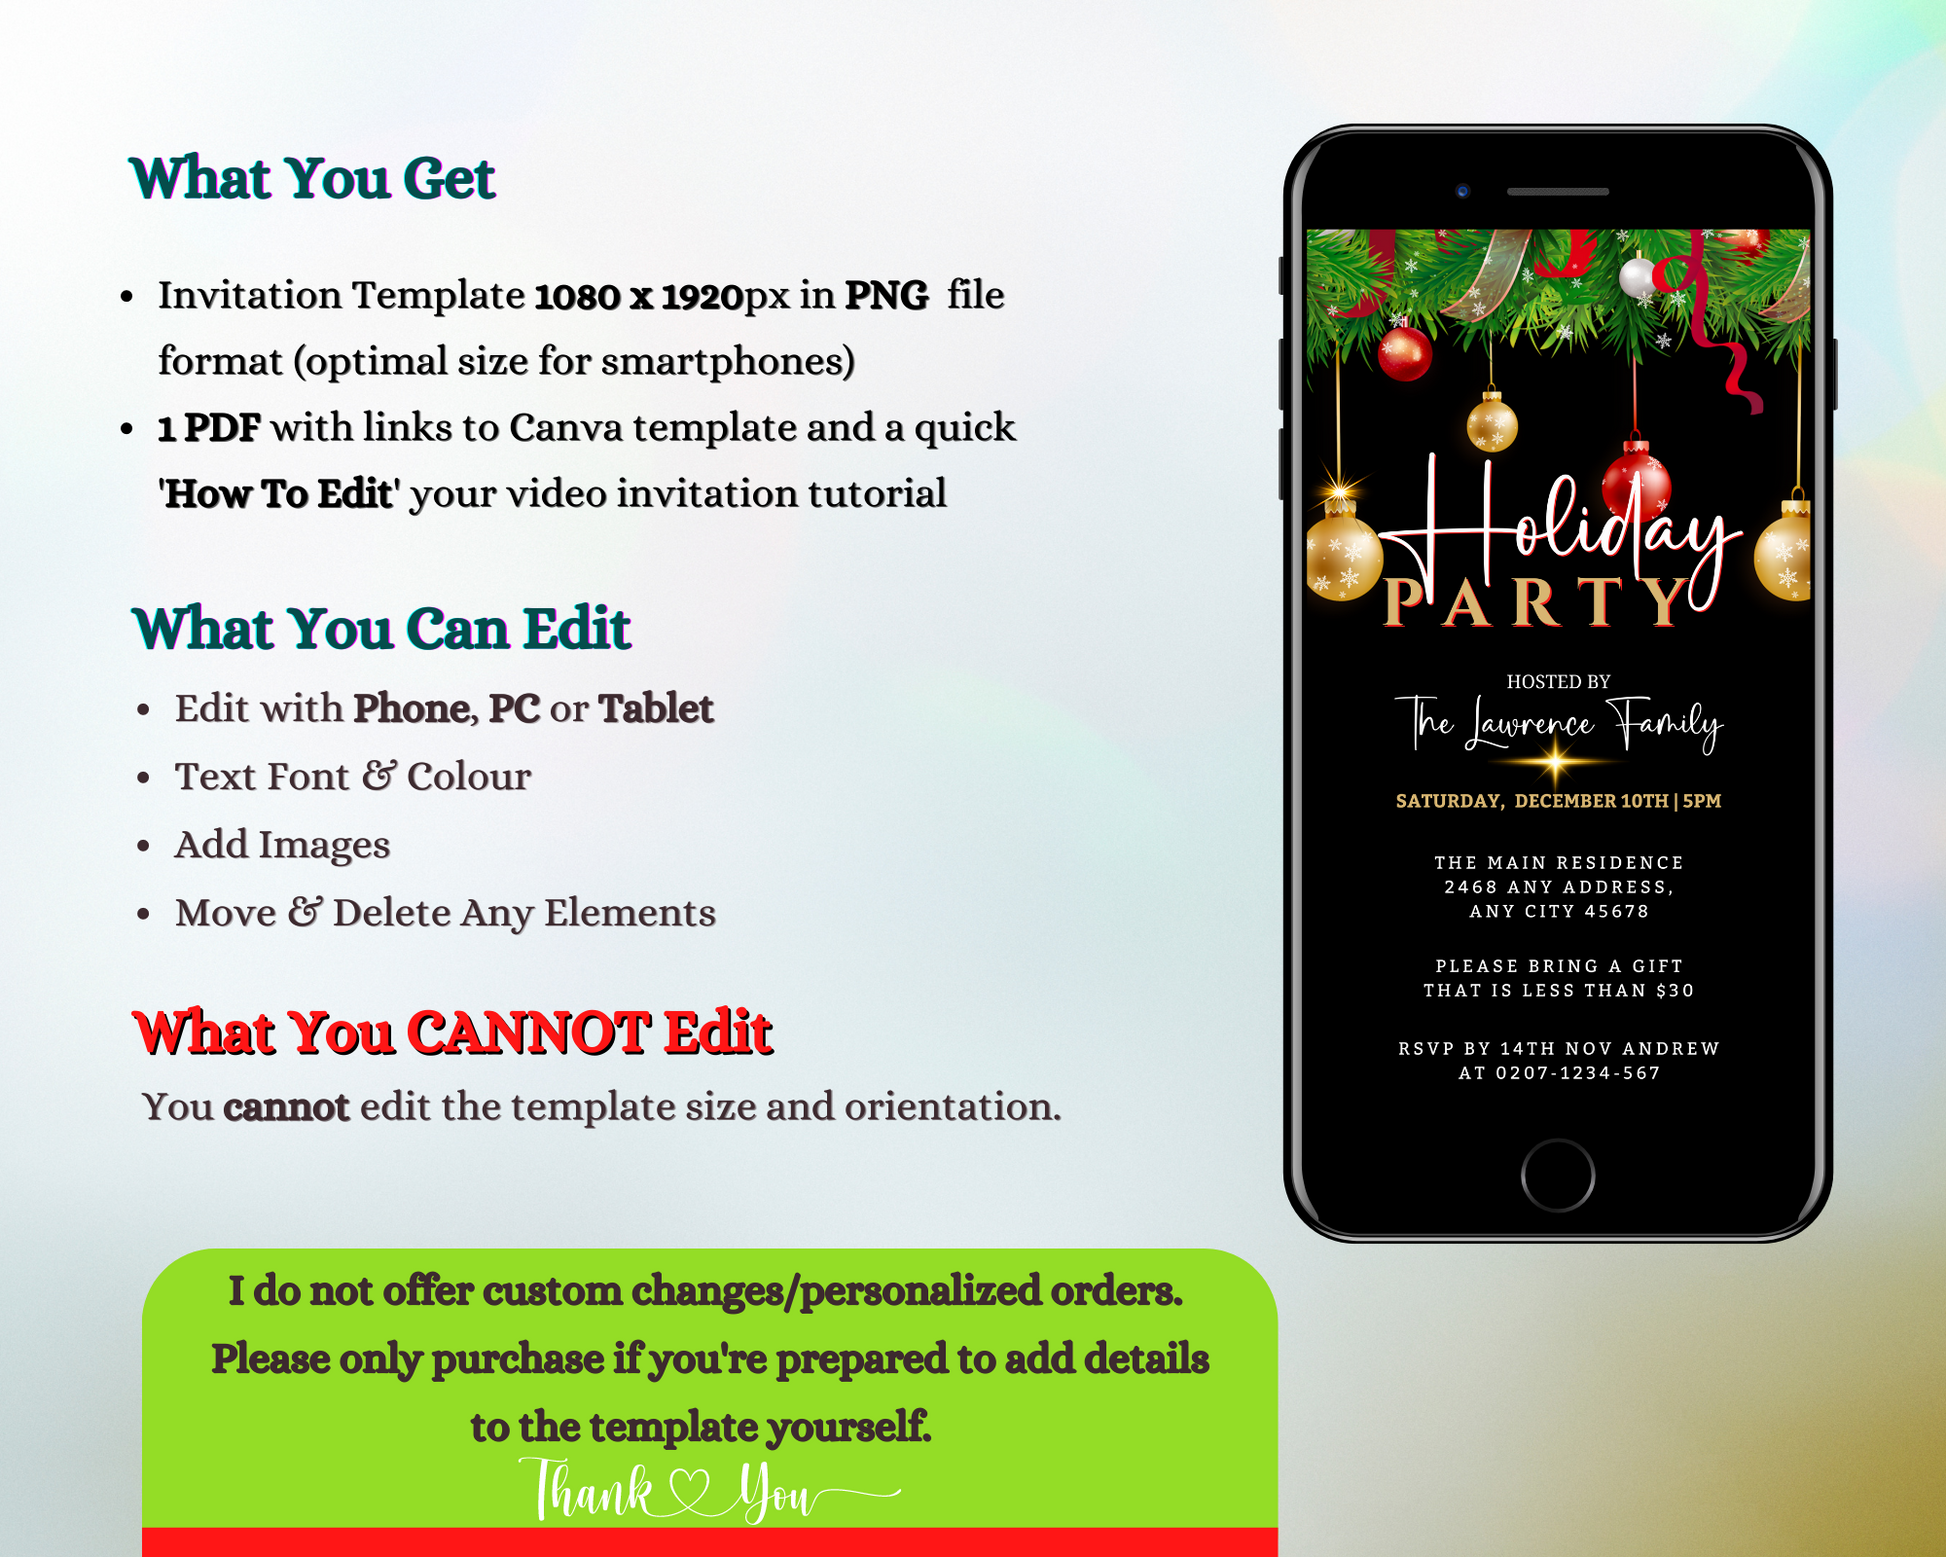 Gold Red Green Ornaments | Holiday Party Evite displayed on a smartphone screen, featuring editable text and festive designs, meant for digital customization and sharing.